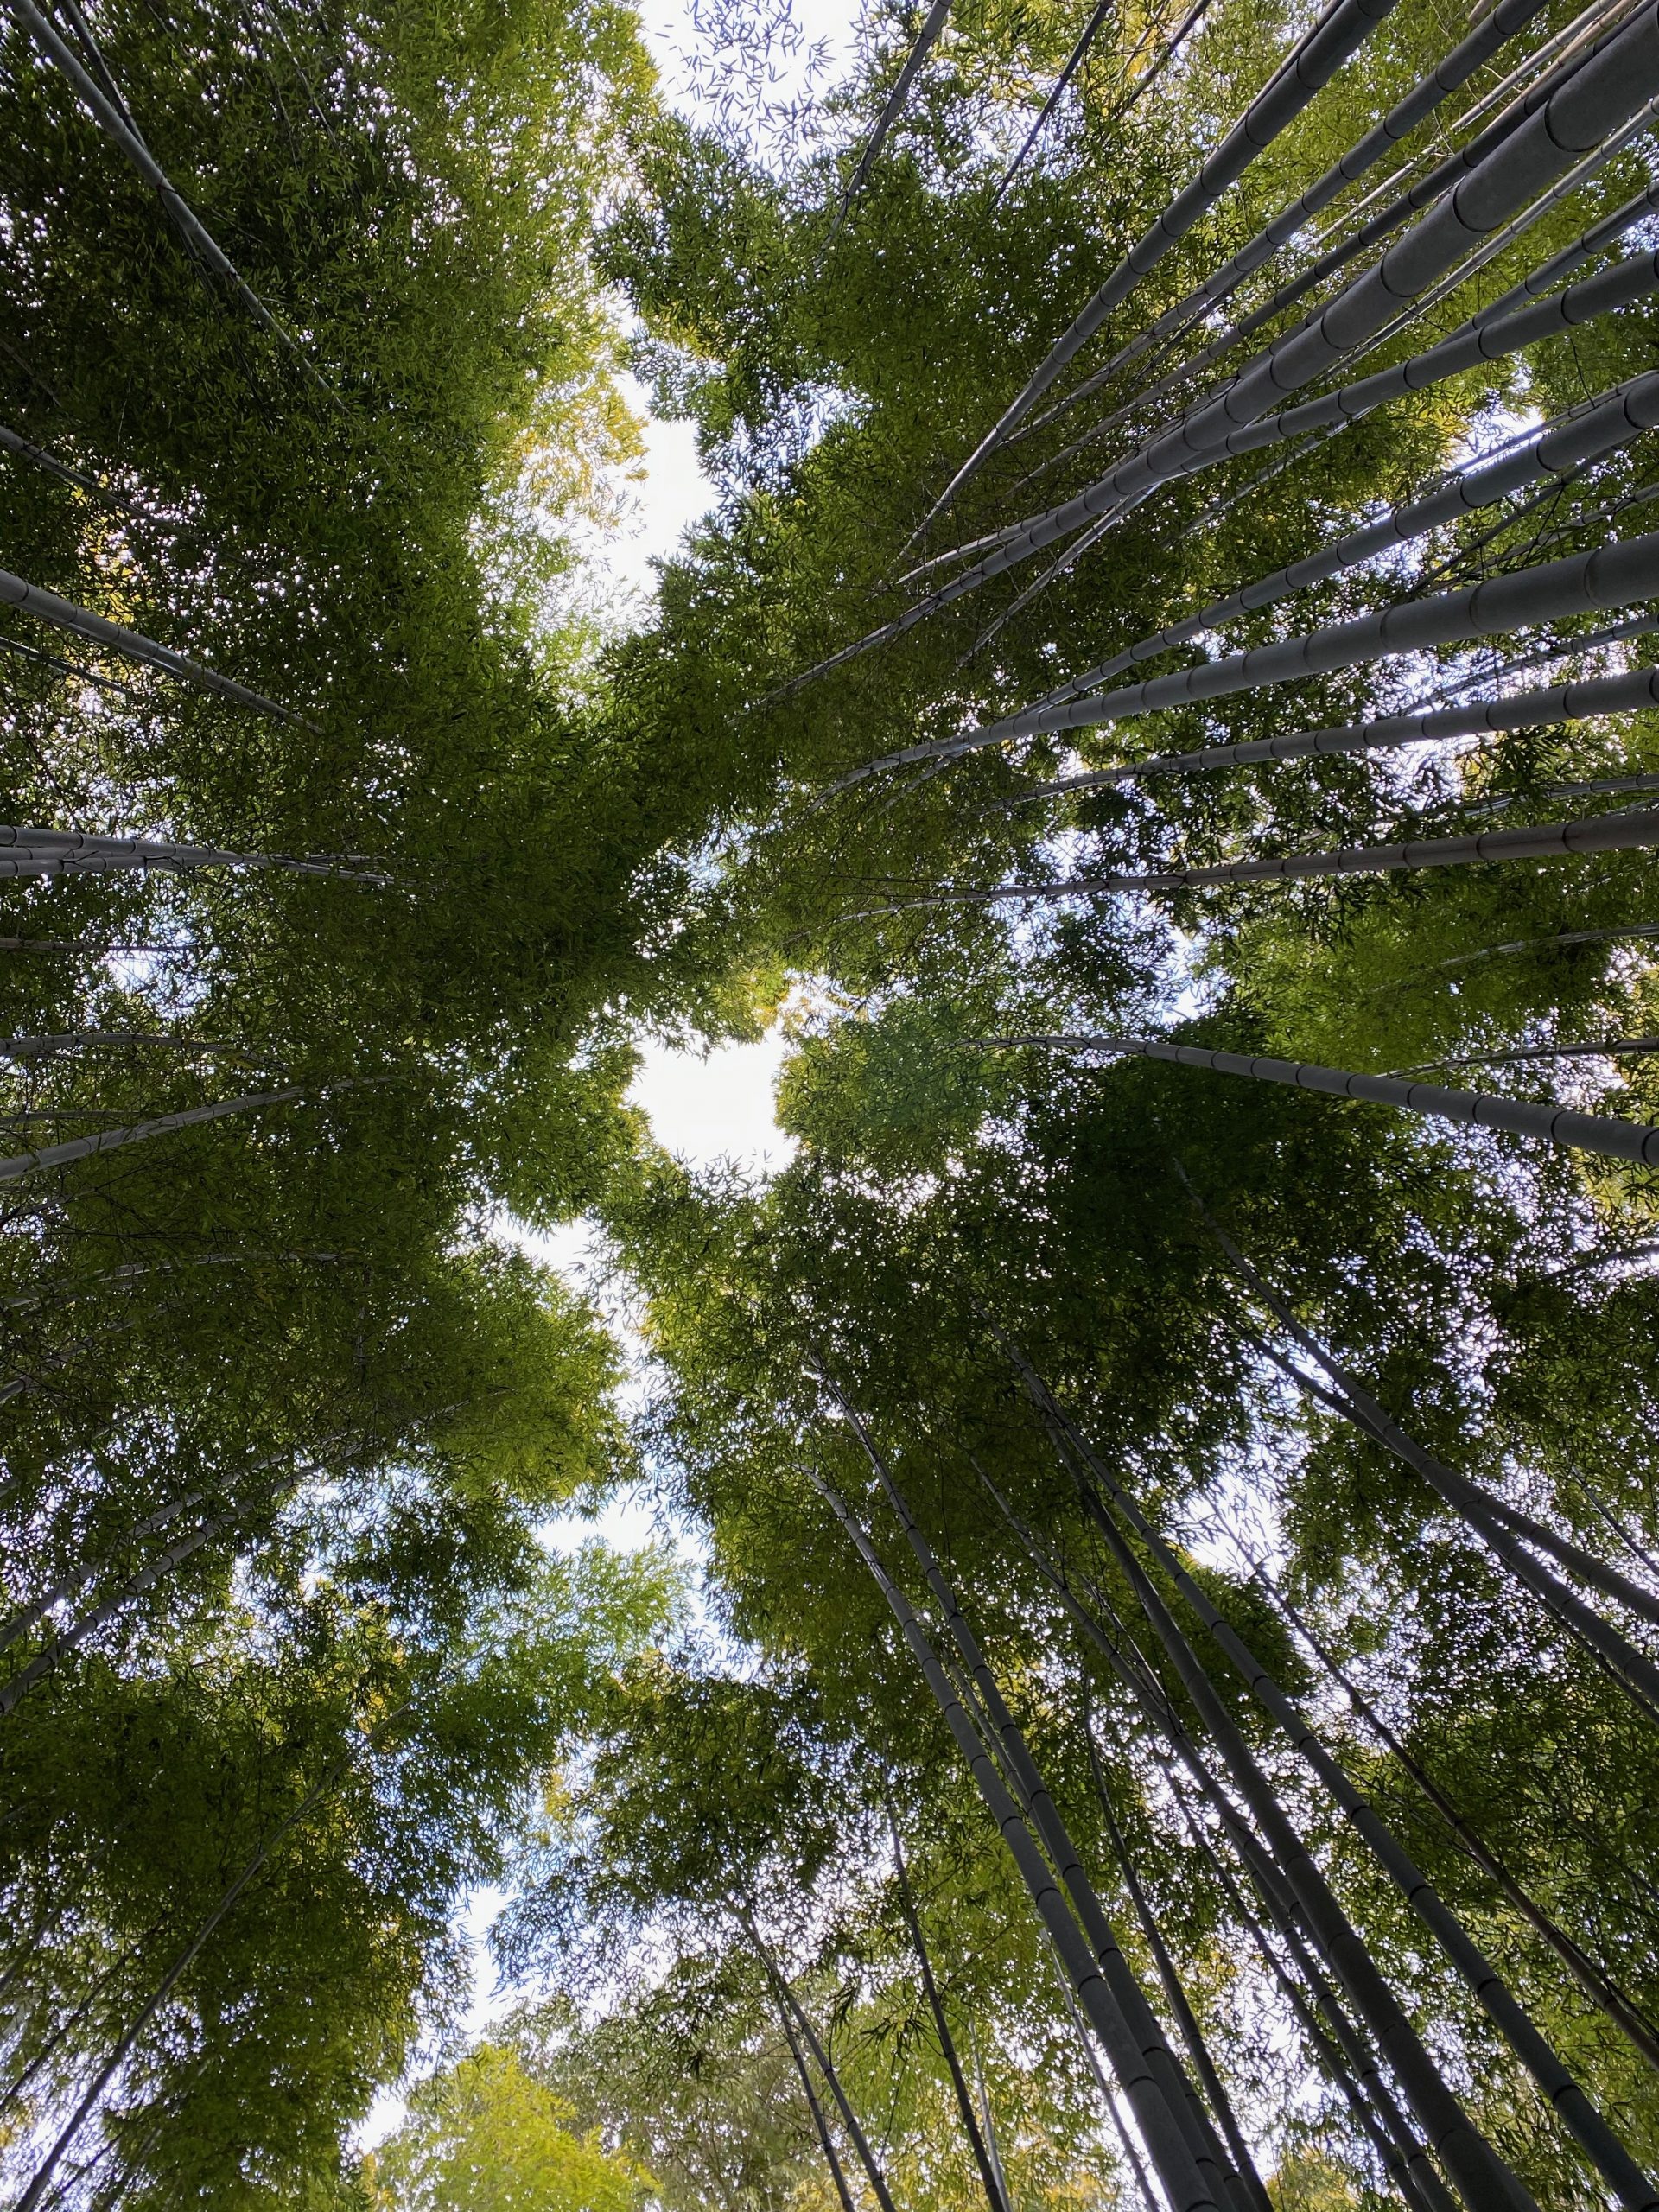 A view from the ground looking up in the middle of the bamboo forest